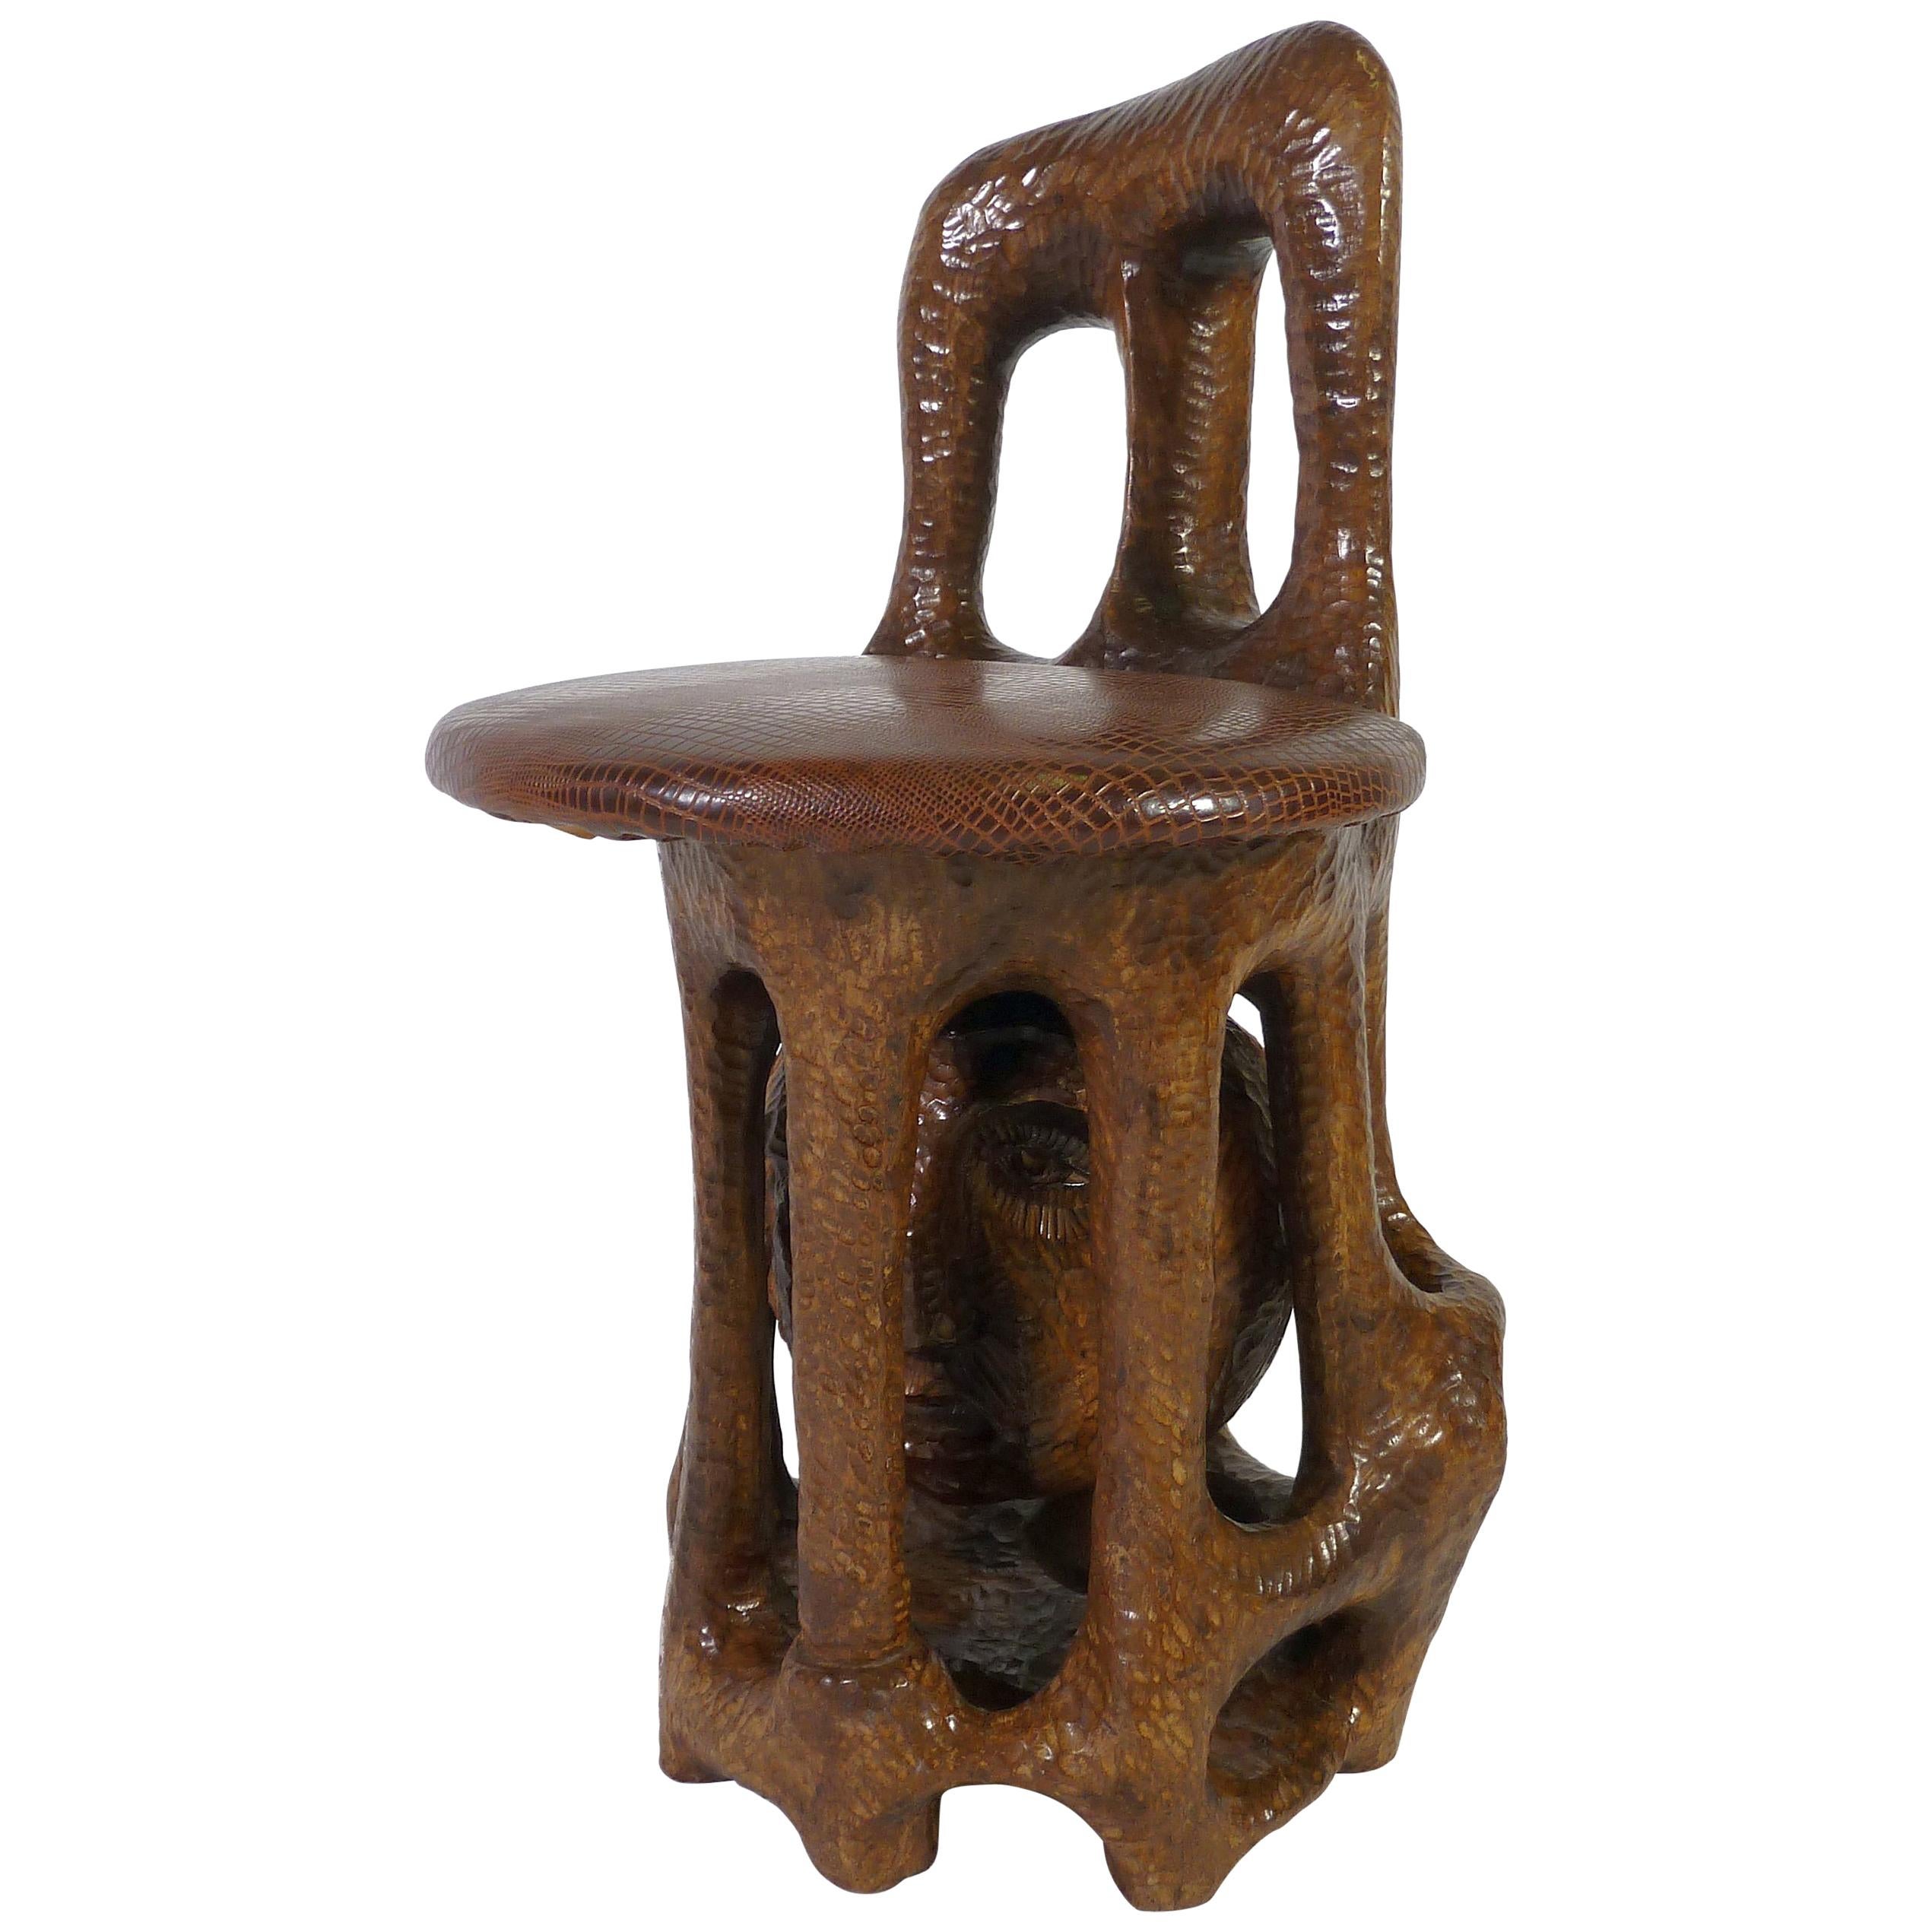 Unique Sol Garson Signed Hand Carved Wood Sculptural Chair For Sale